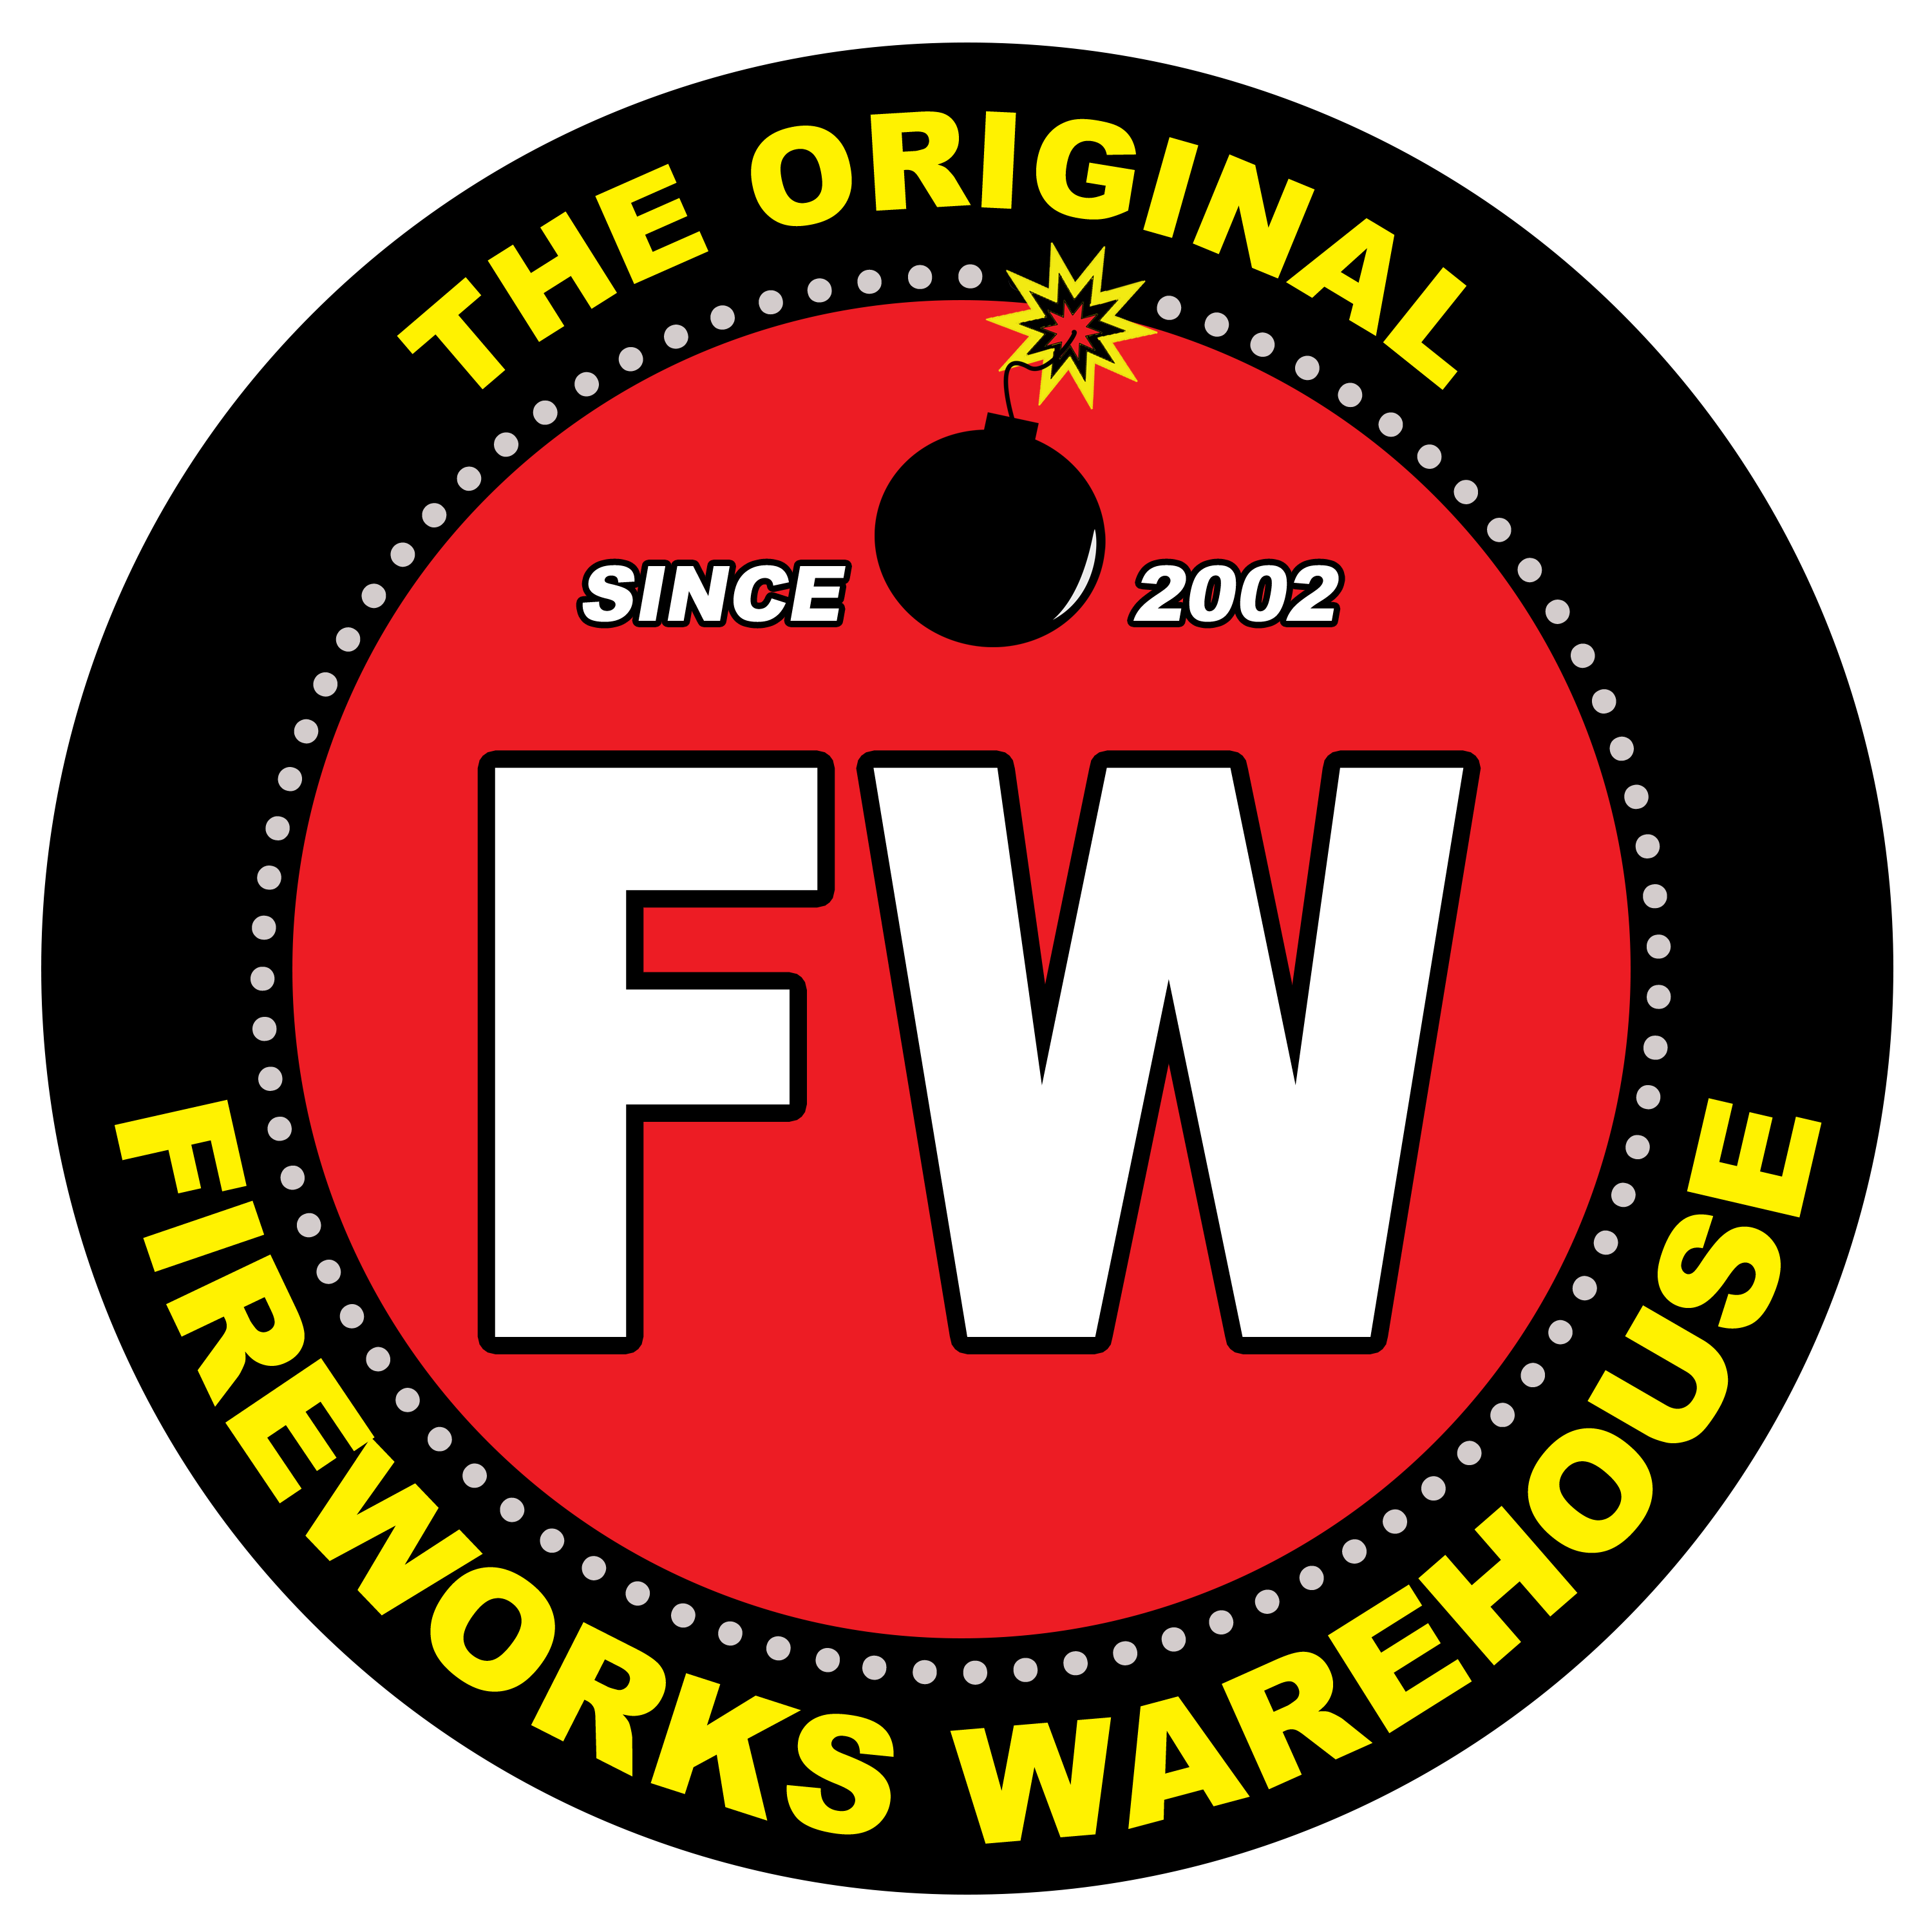 Contact Fireworks Warehouse